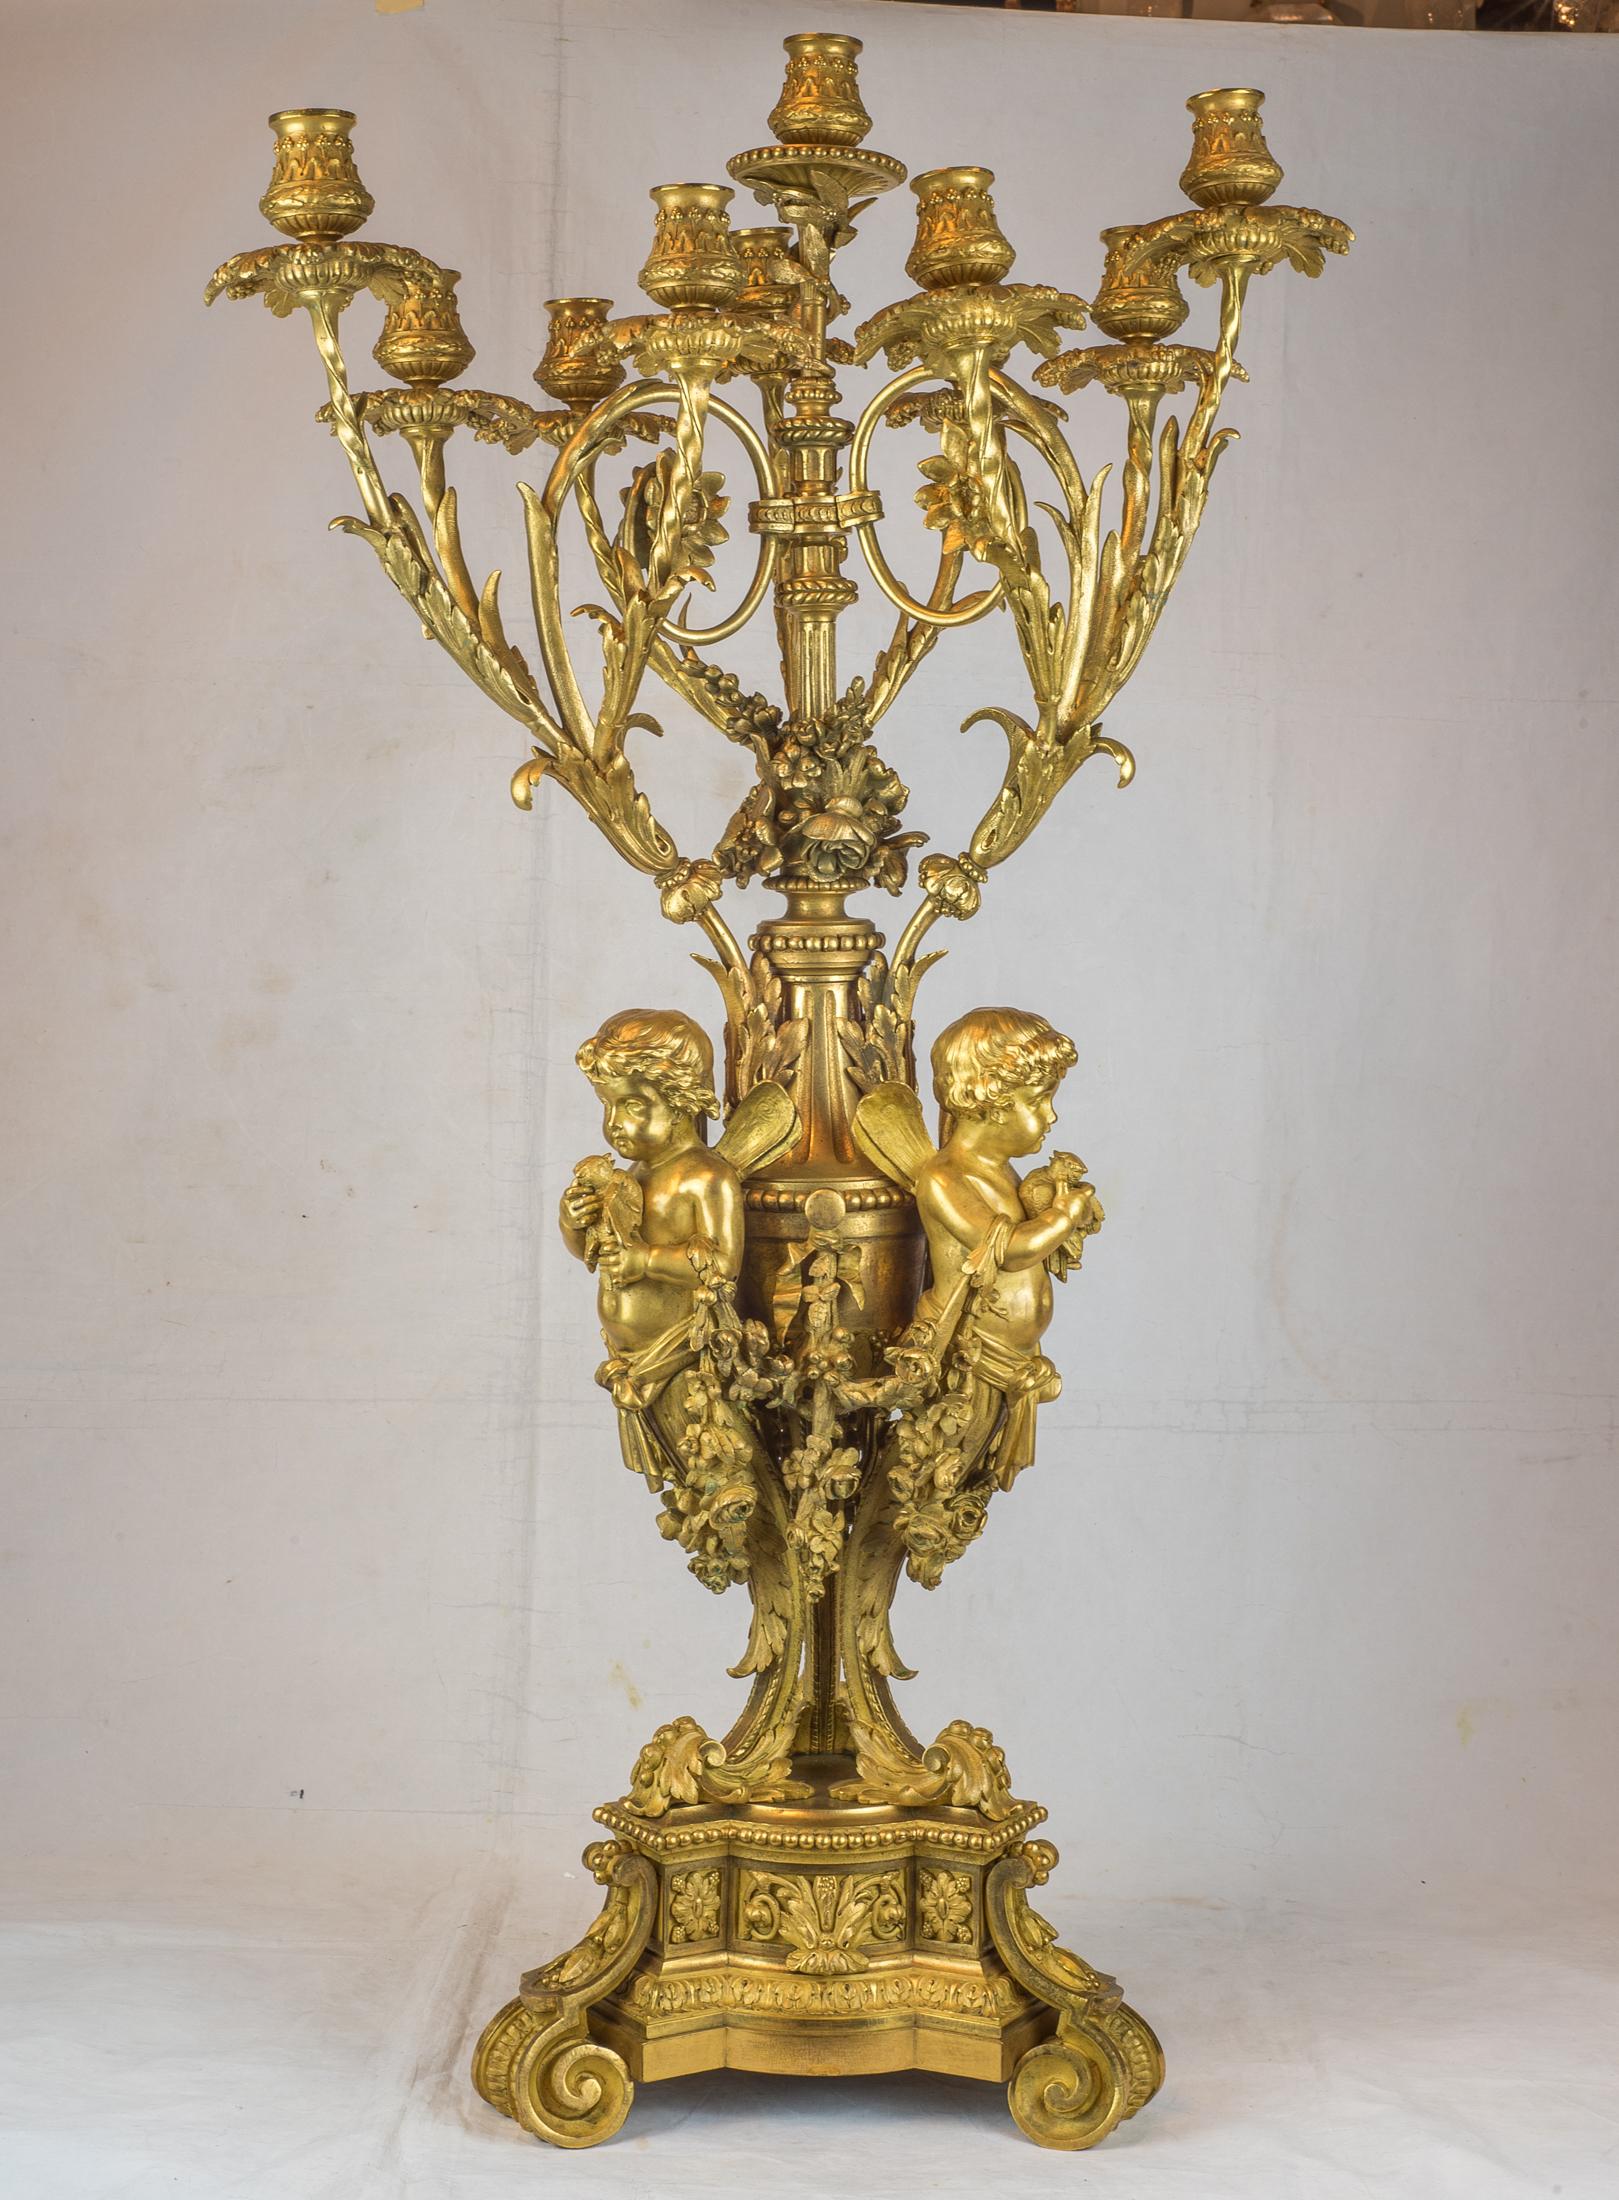 Gilt Important Pair of 19th Century French Ormolu Ten-Light Candelabra by H. Picard For Sale